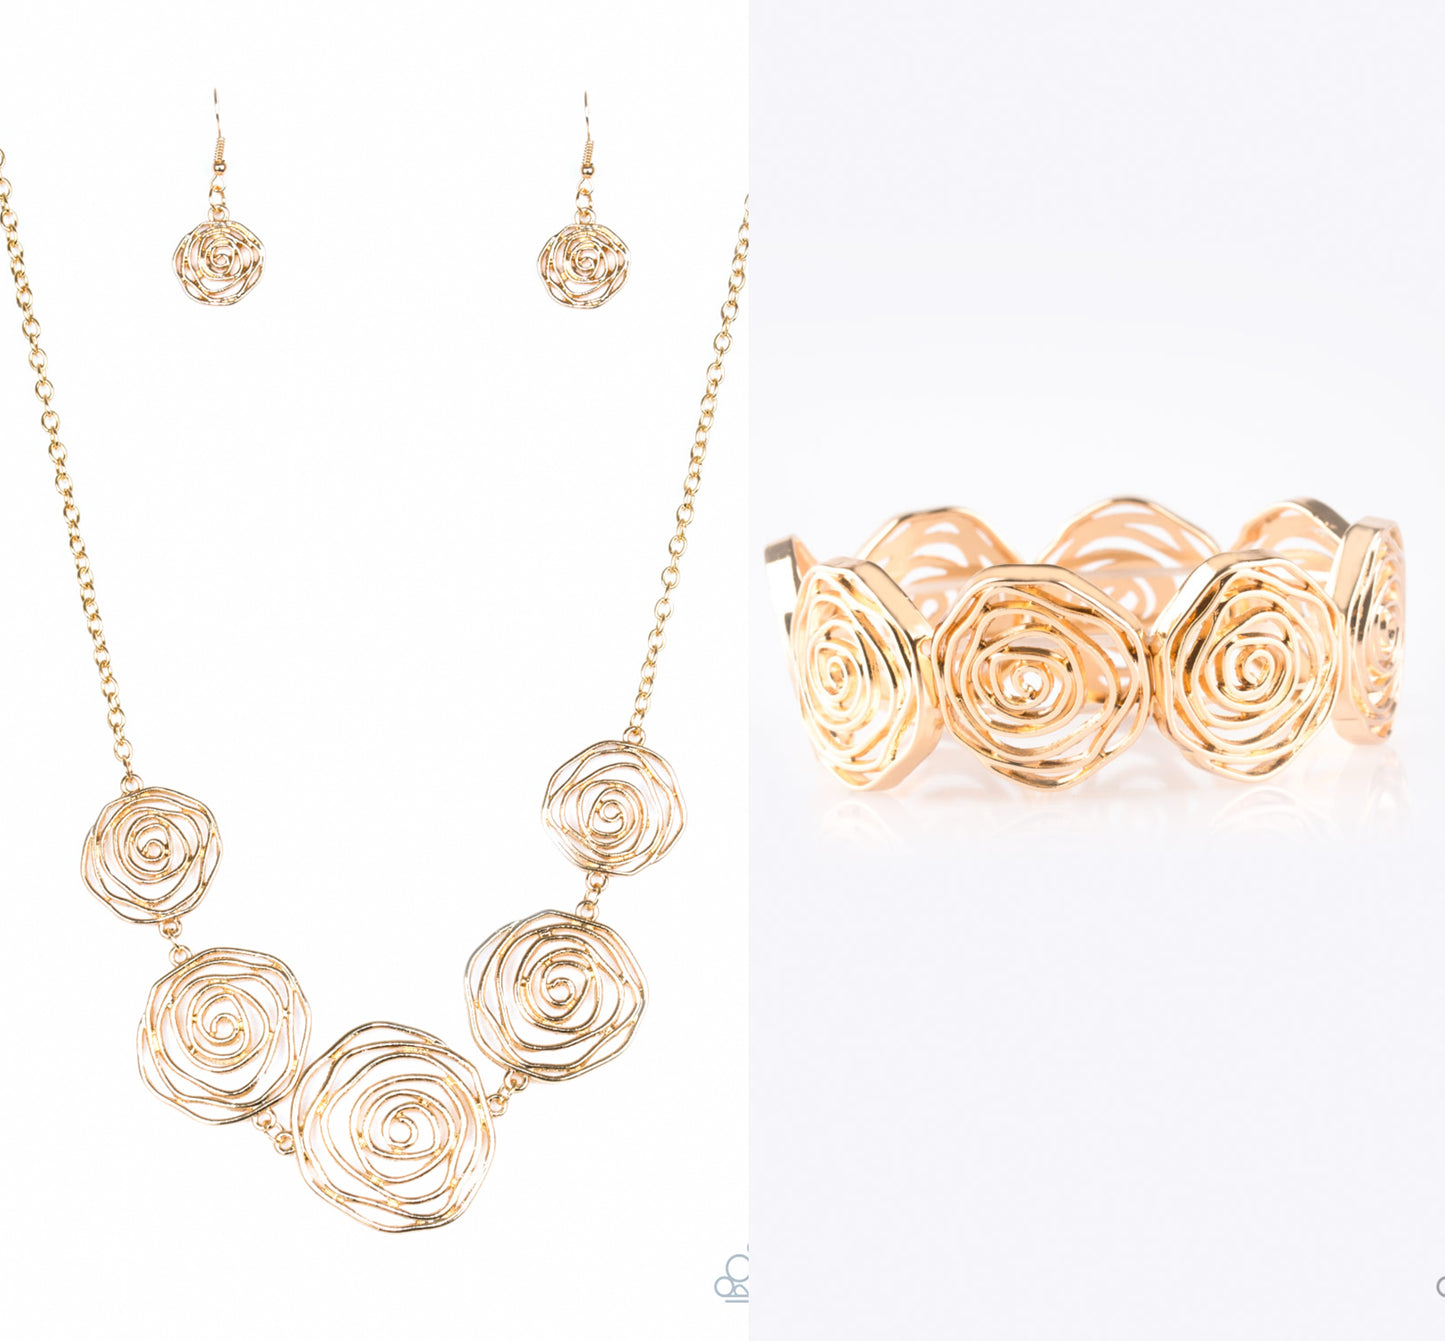 Rosy Rosette - Gold necklace w/ matching bracelet